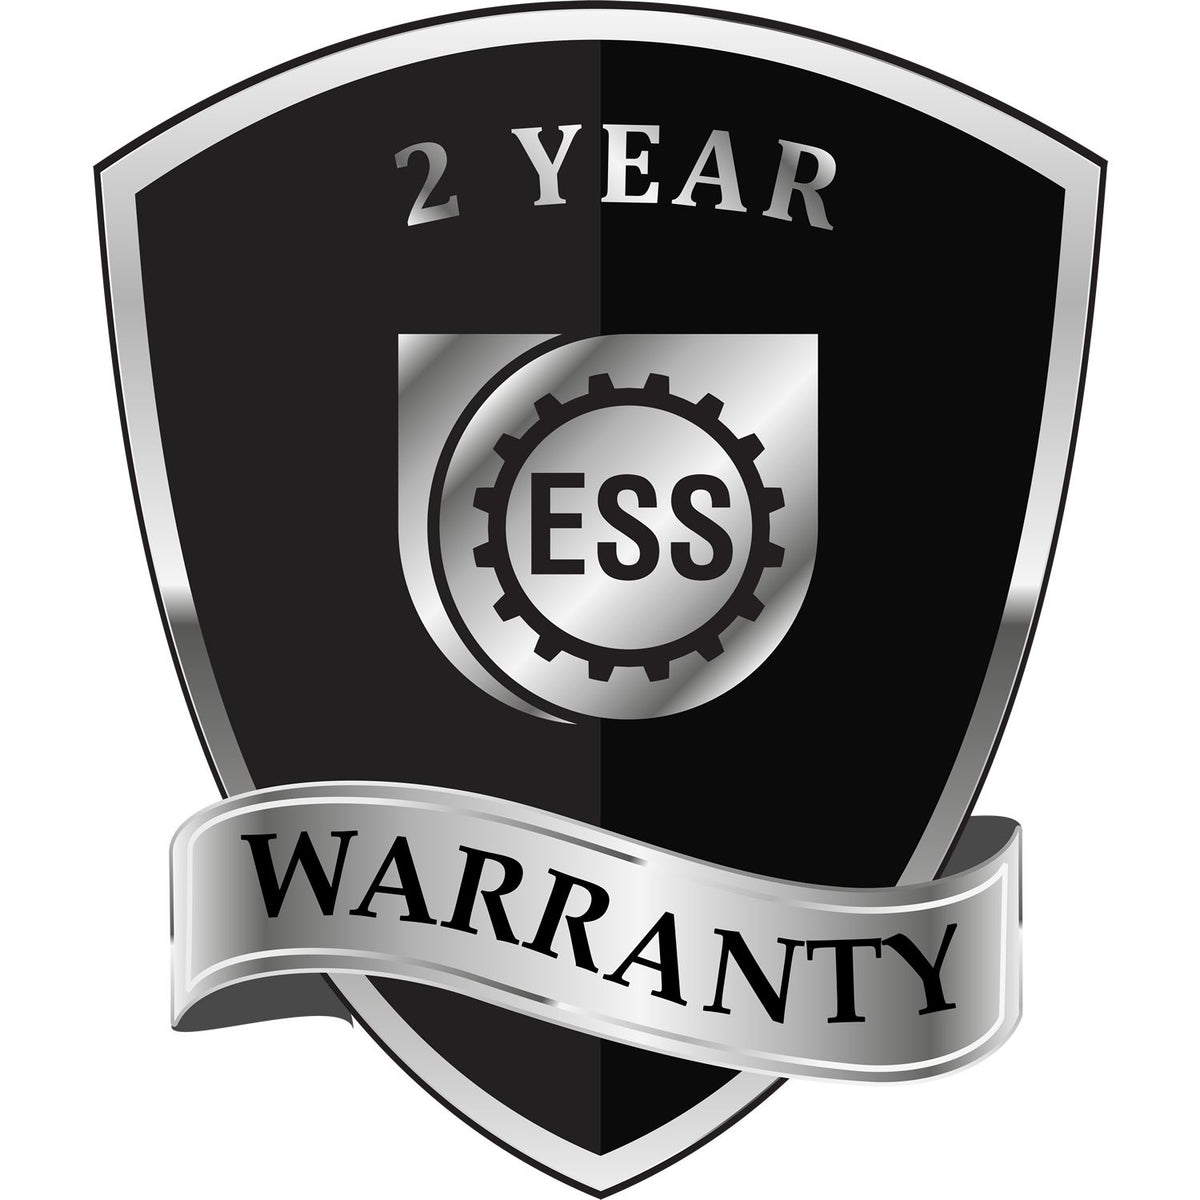 A black and silver badge or emblem showing warranty information for the Gift New Mexico Landscape Architect Seal